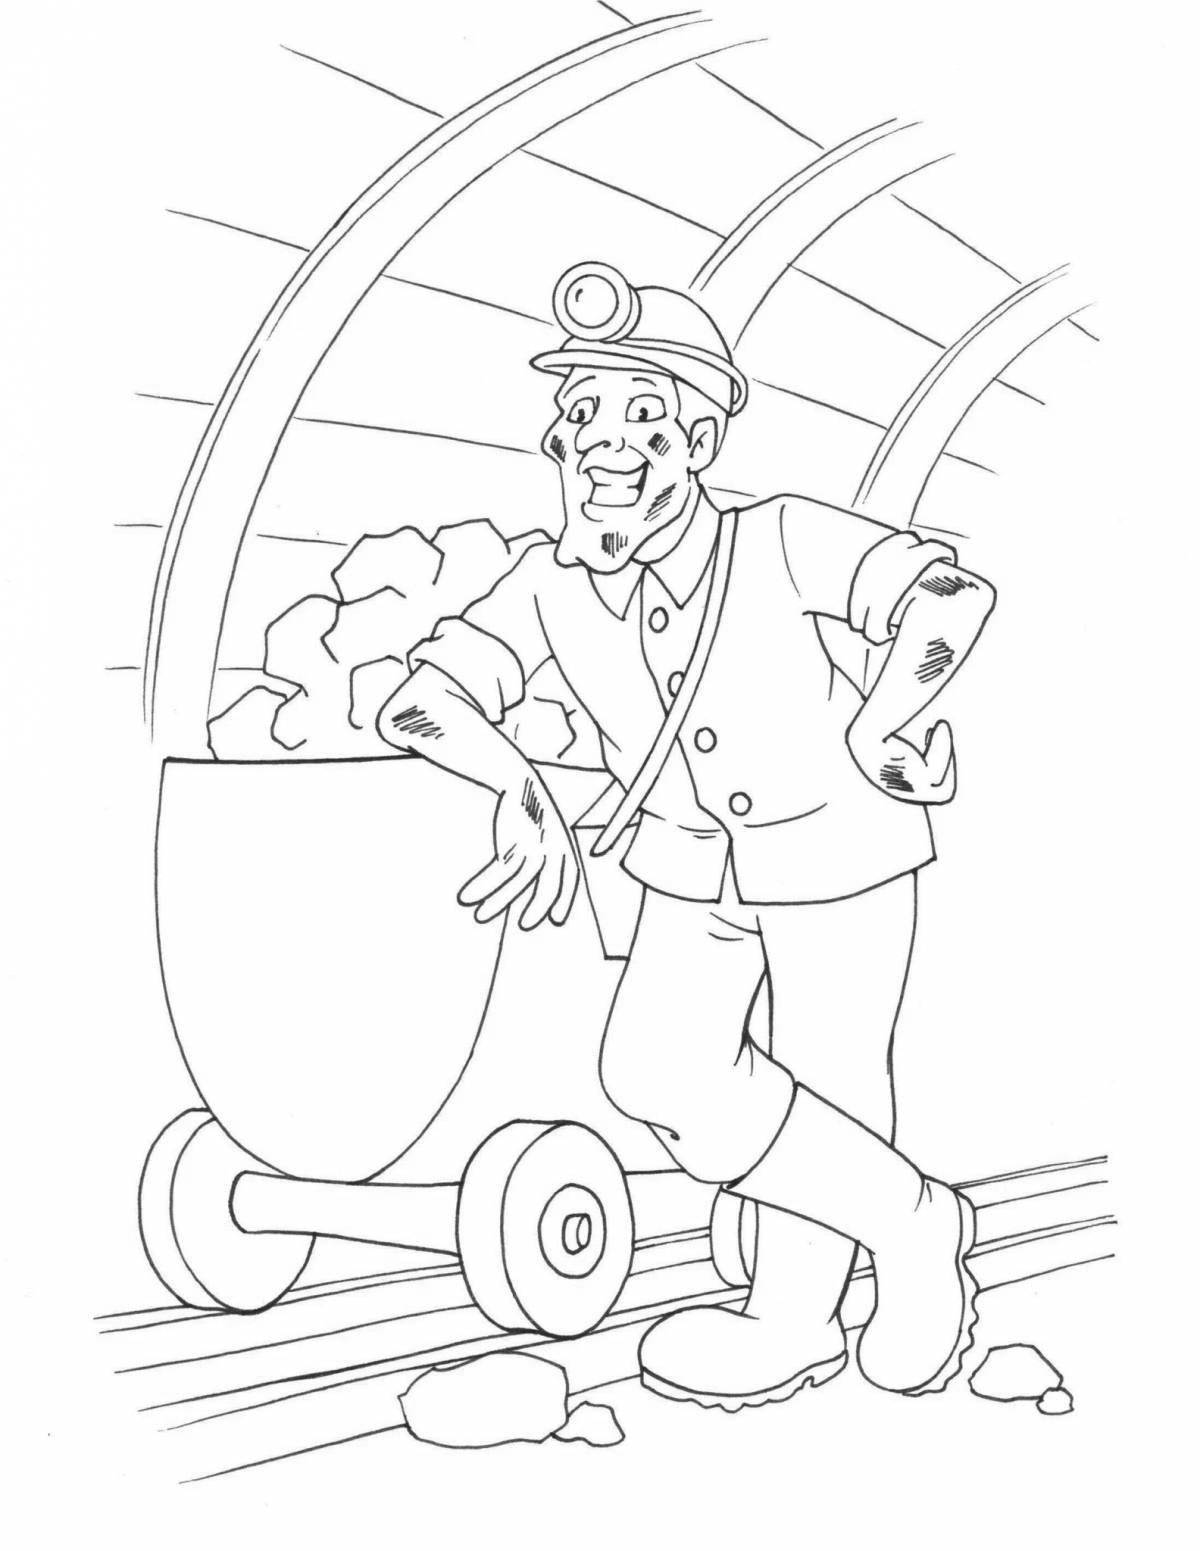 Sweet miner coloring book for kids